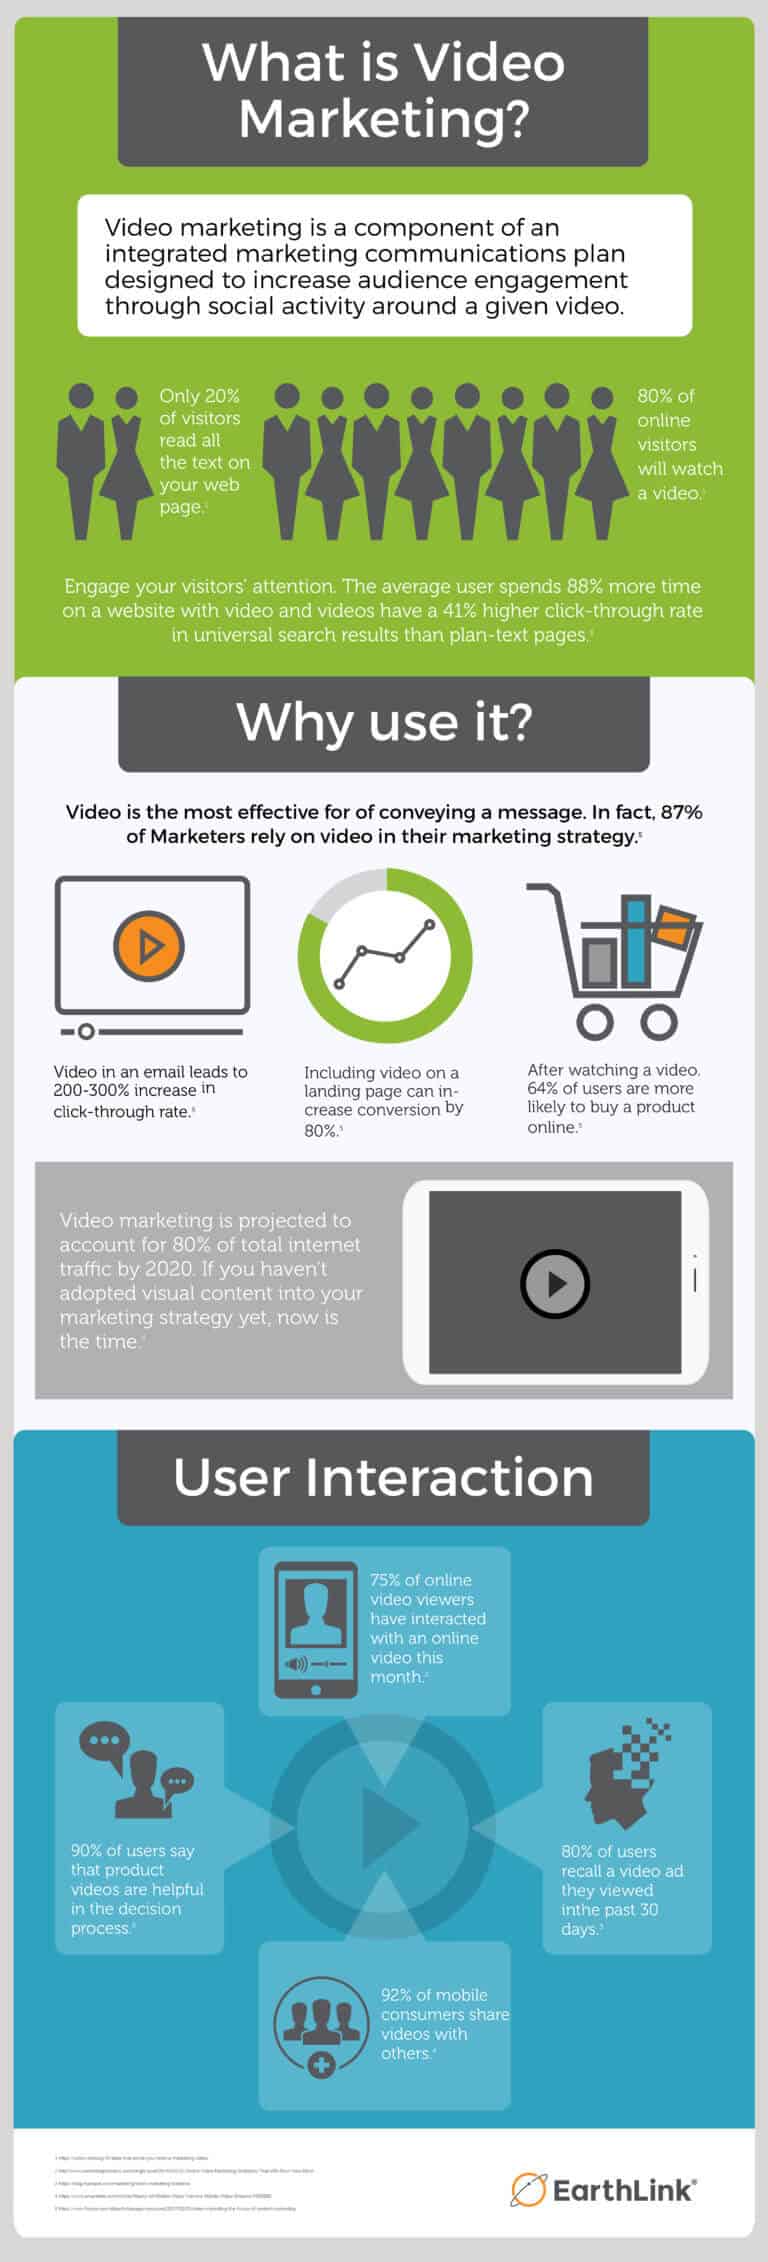 Small Business Video Video Marketing Earthlink Infographic